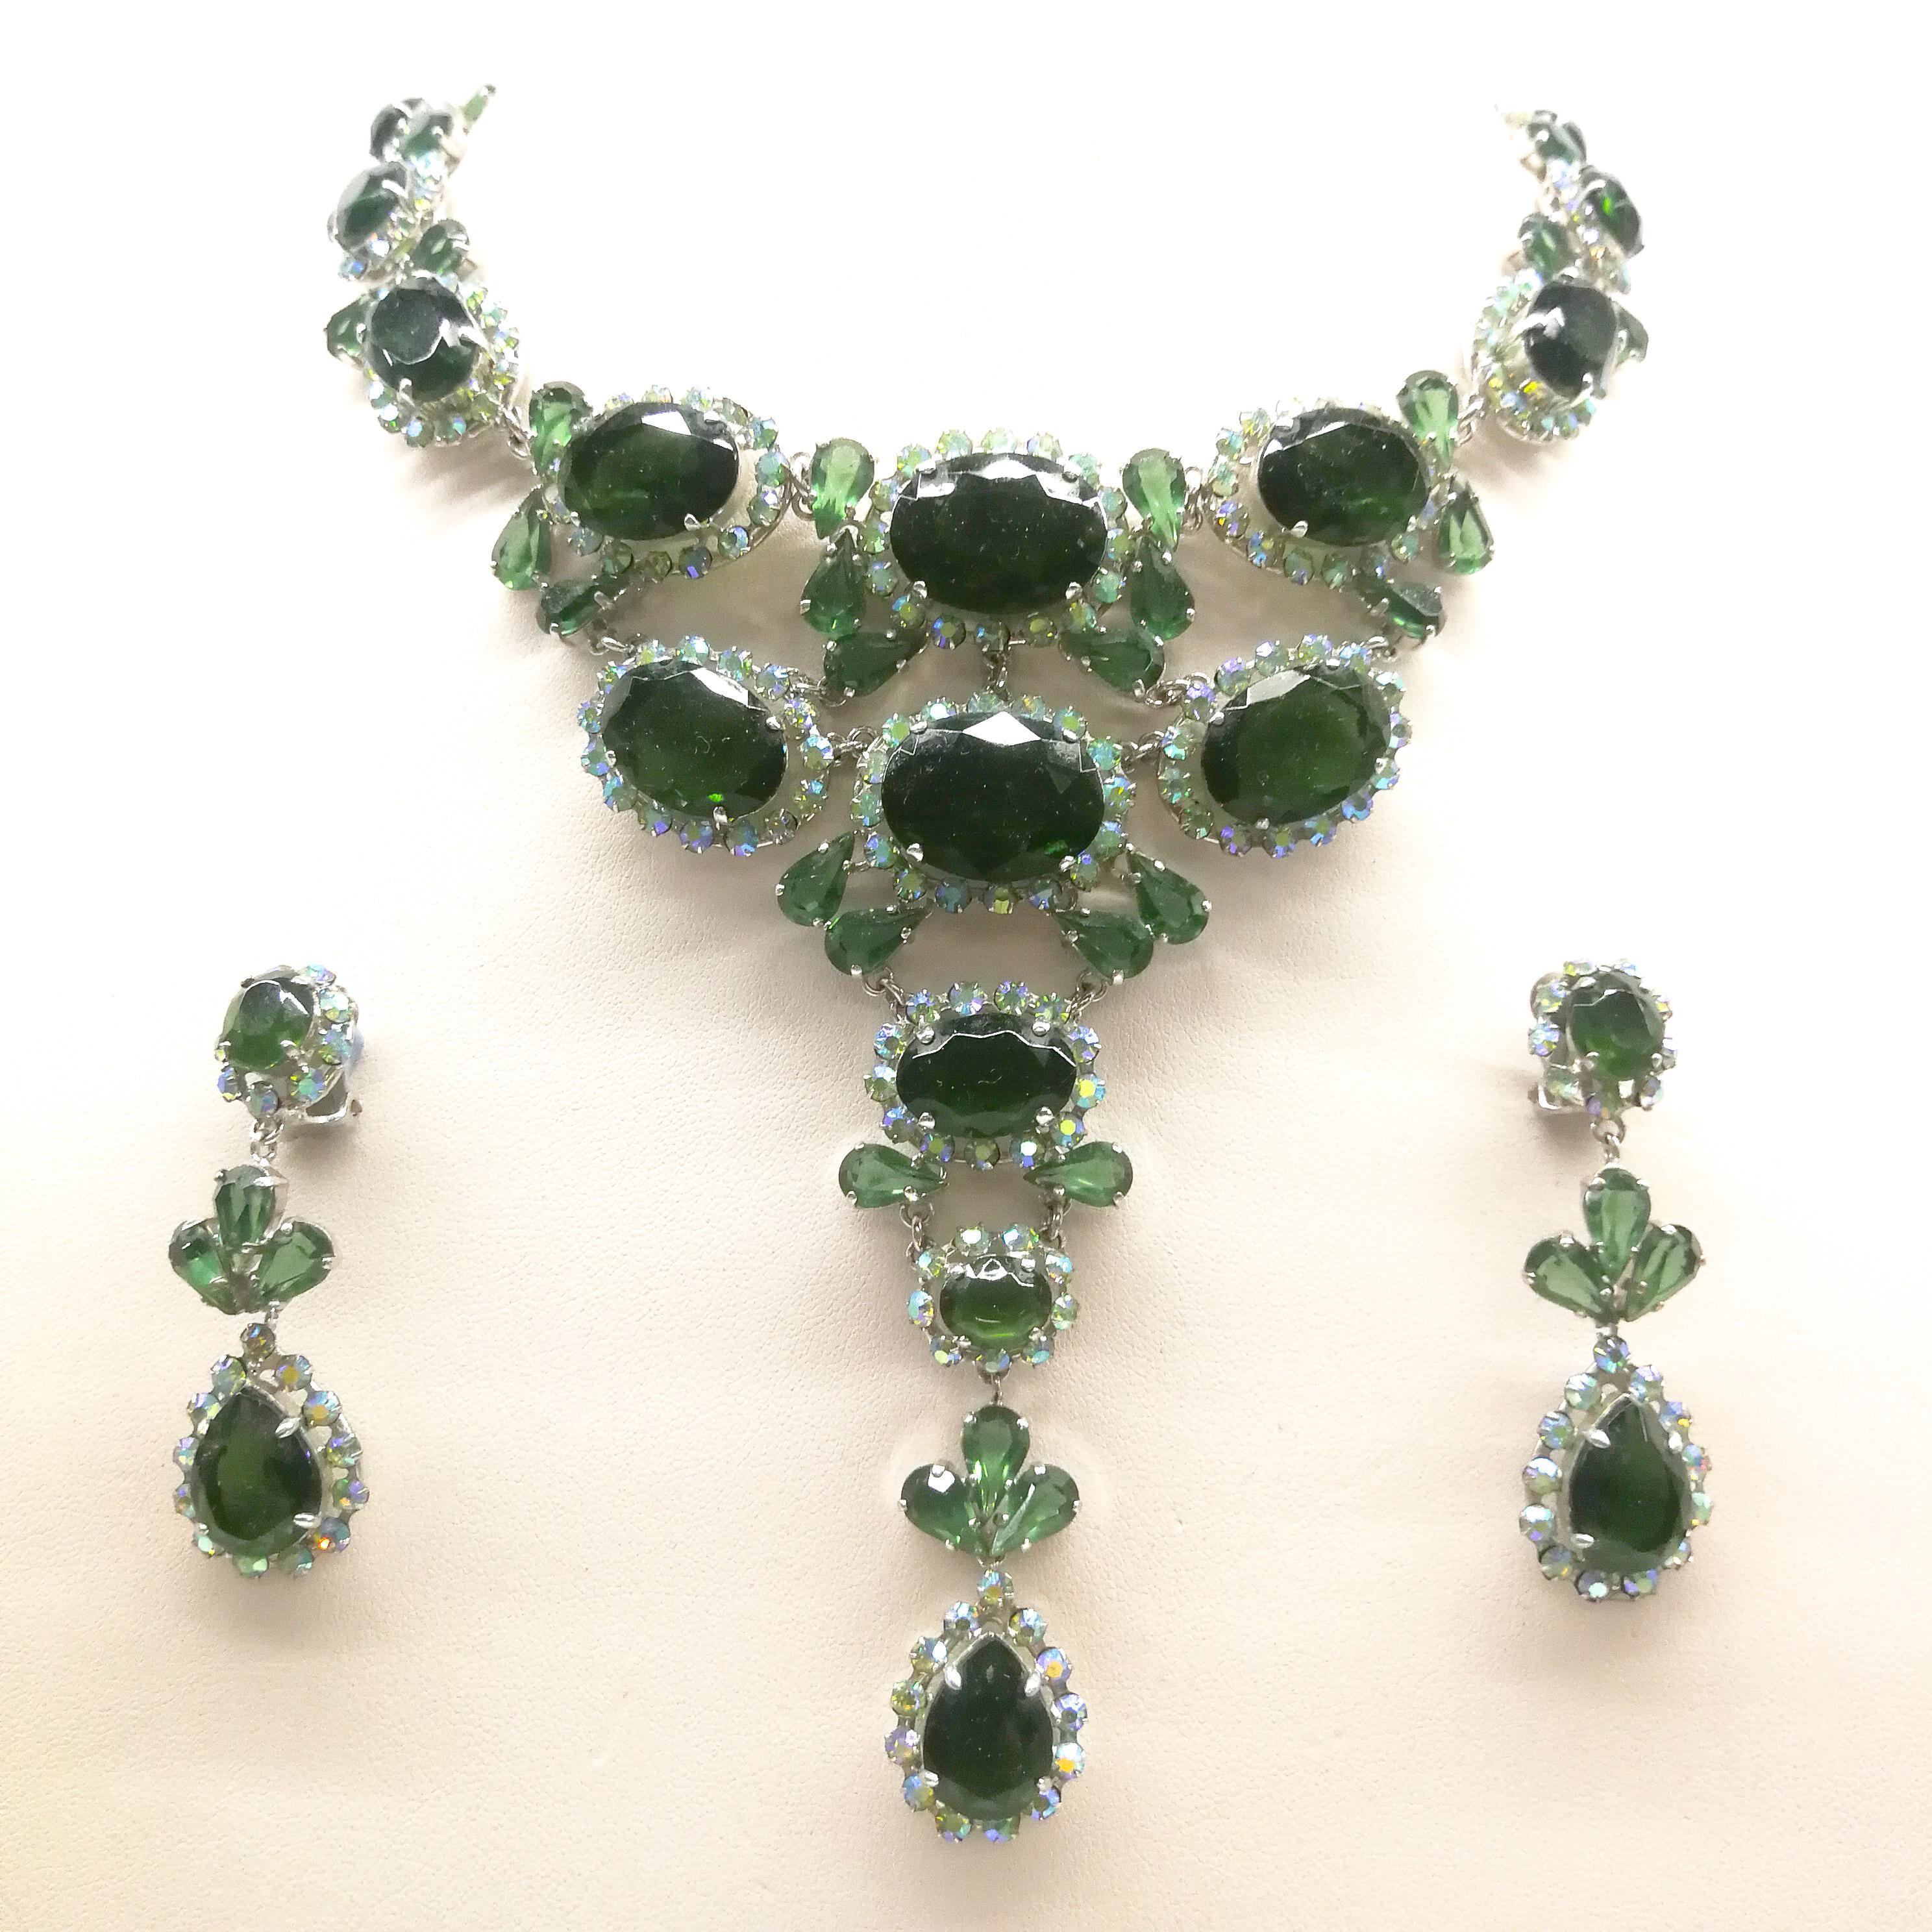 A very striking necklace and earrings, Henkel & Grosse for Christian Dior, 1957. 3